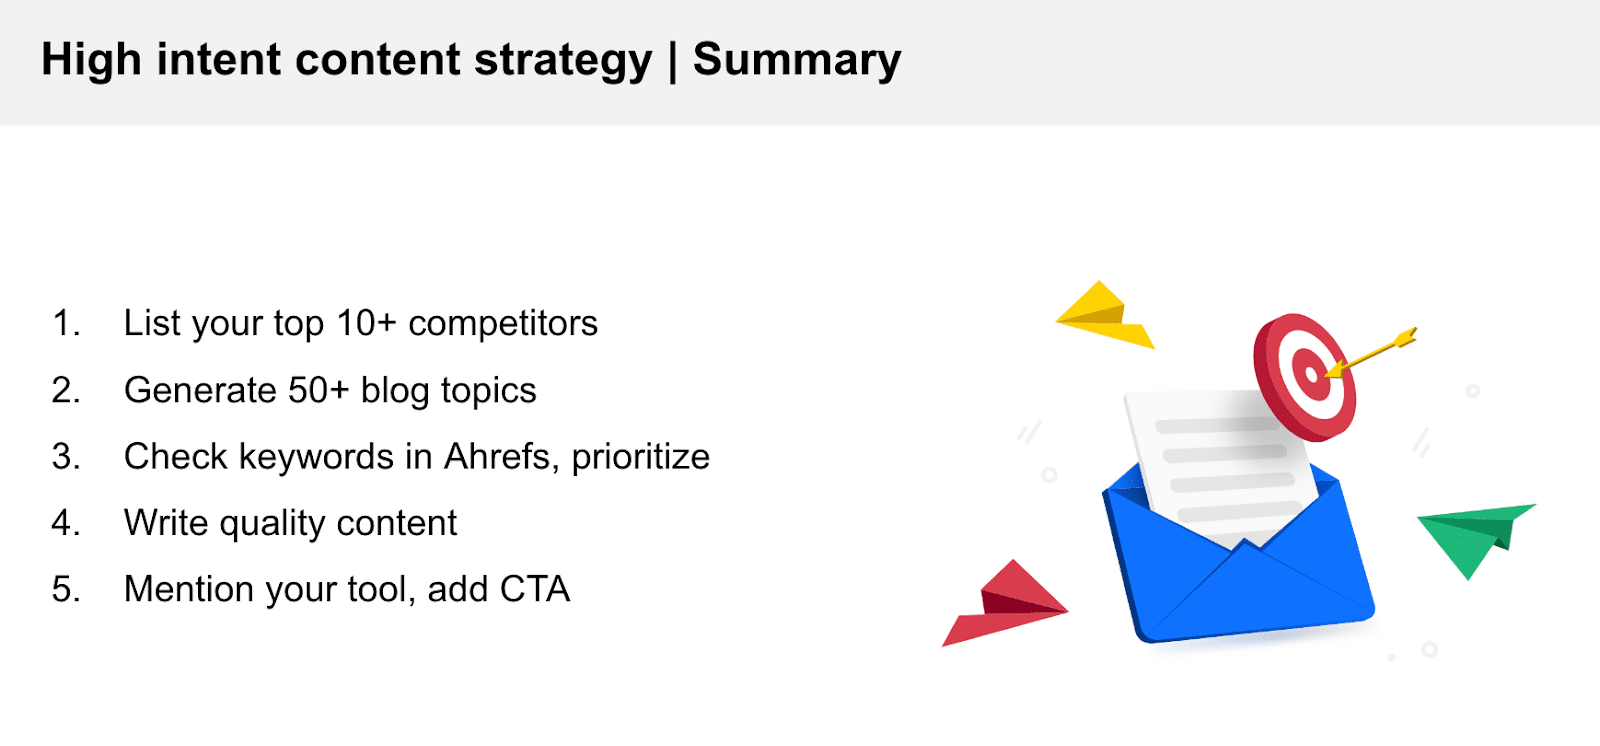 SaaS content strategy: Summary of high intent content strategy